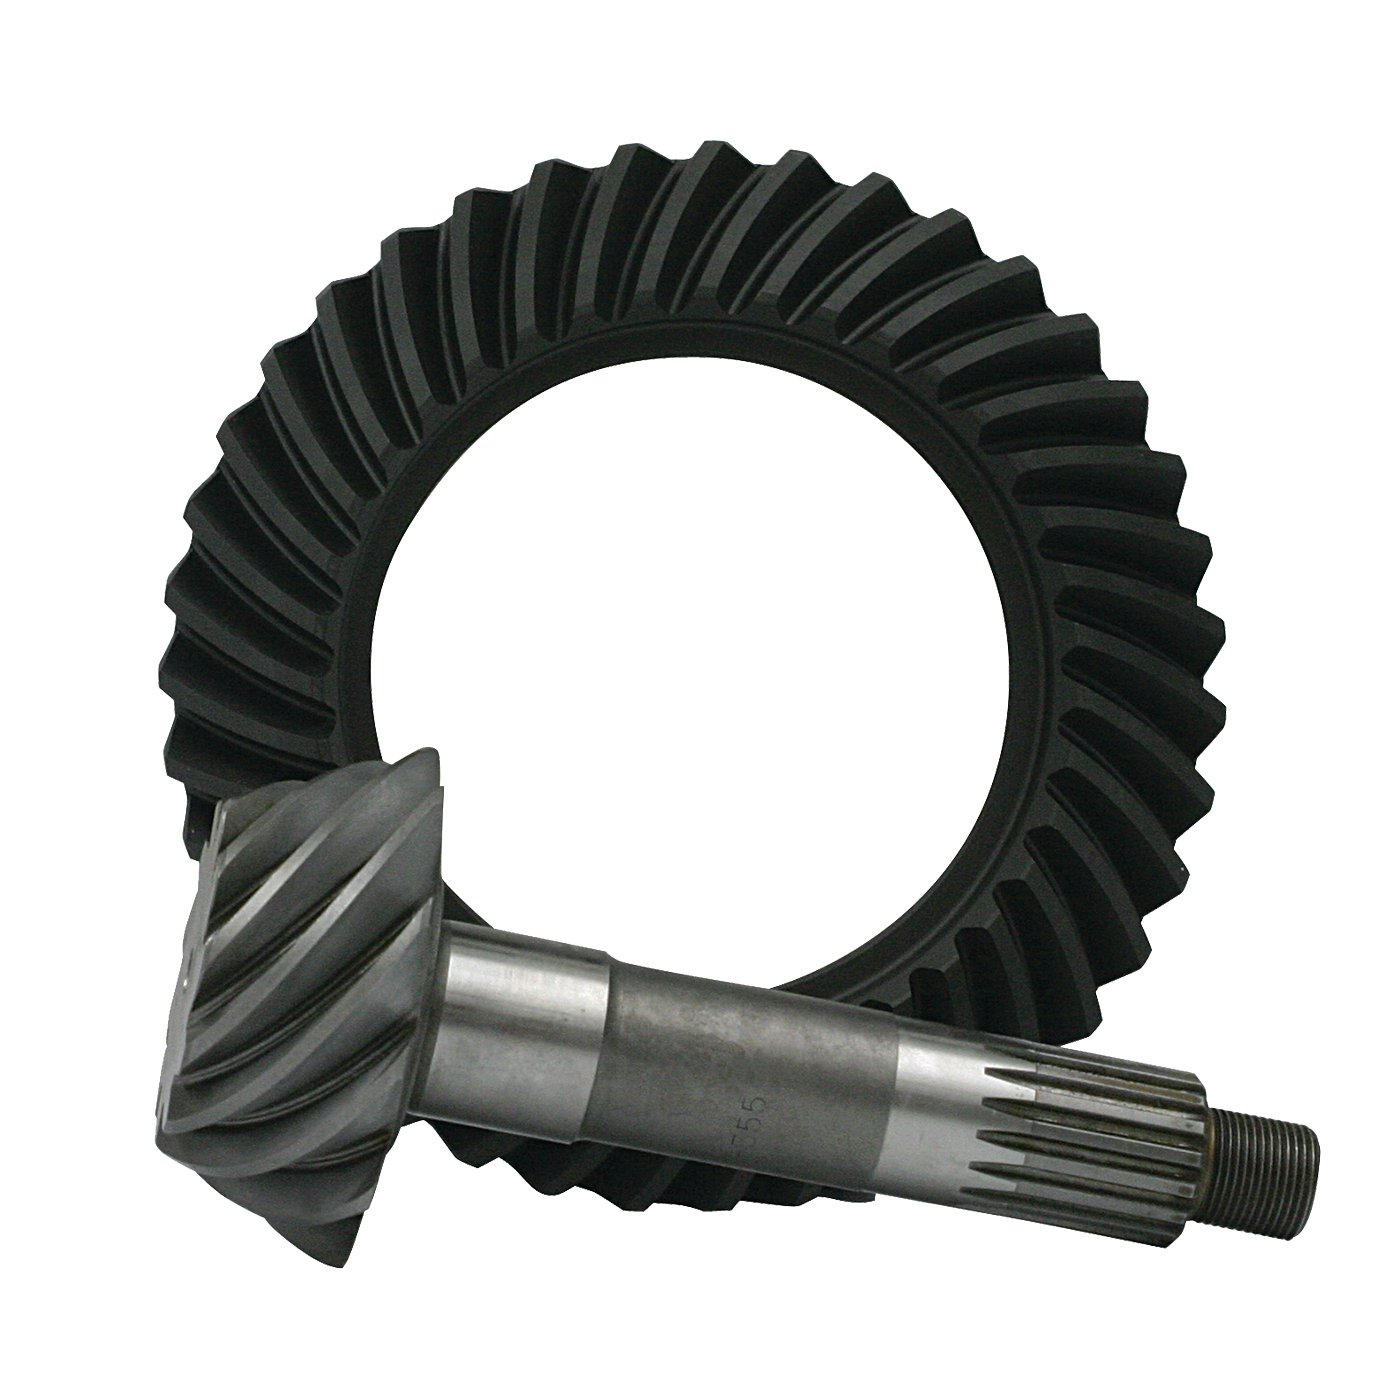 USA Standard 36191 Ring & Pinion Gear Set, For GM Chevy 55P, 3.73 Ratio